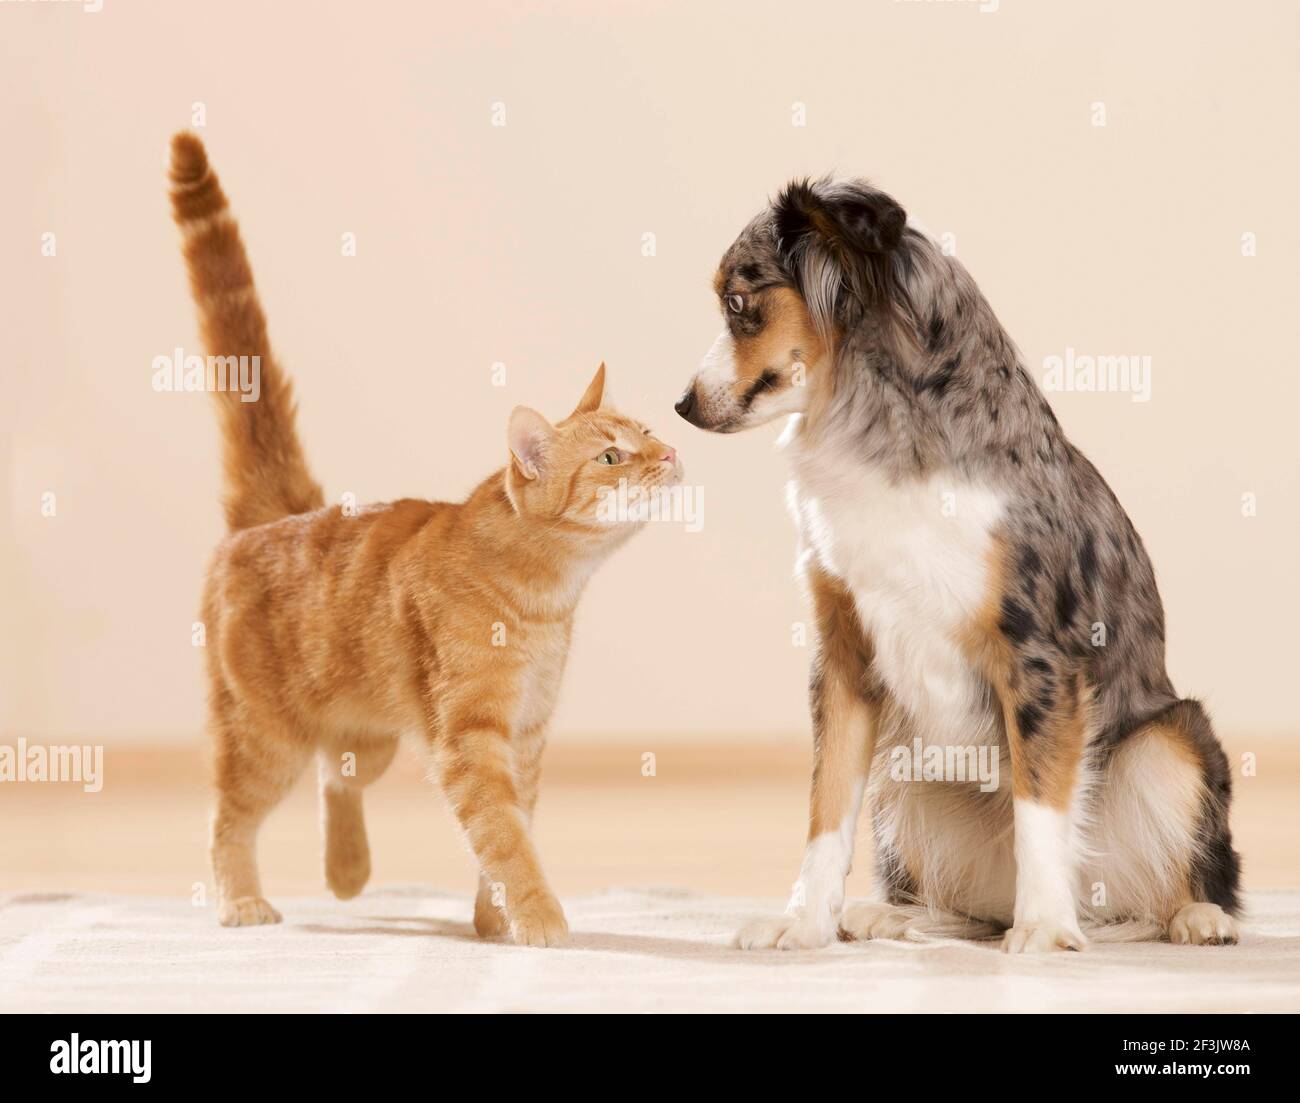 Mini Australian Shepherd and domestic cat. An adult dog and a tabby cat get to know each other. Germany Stock Photo